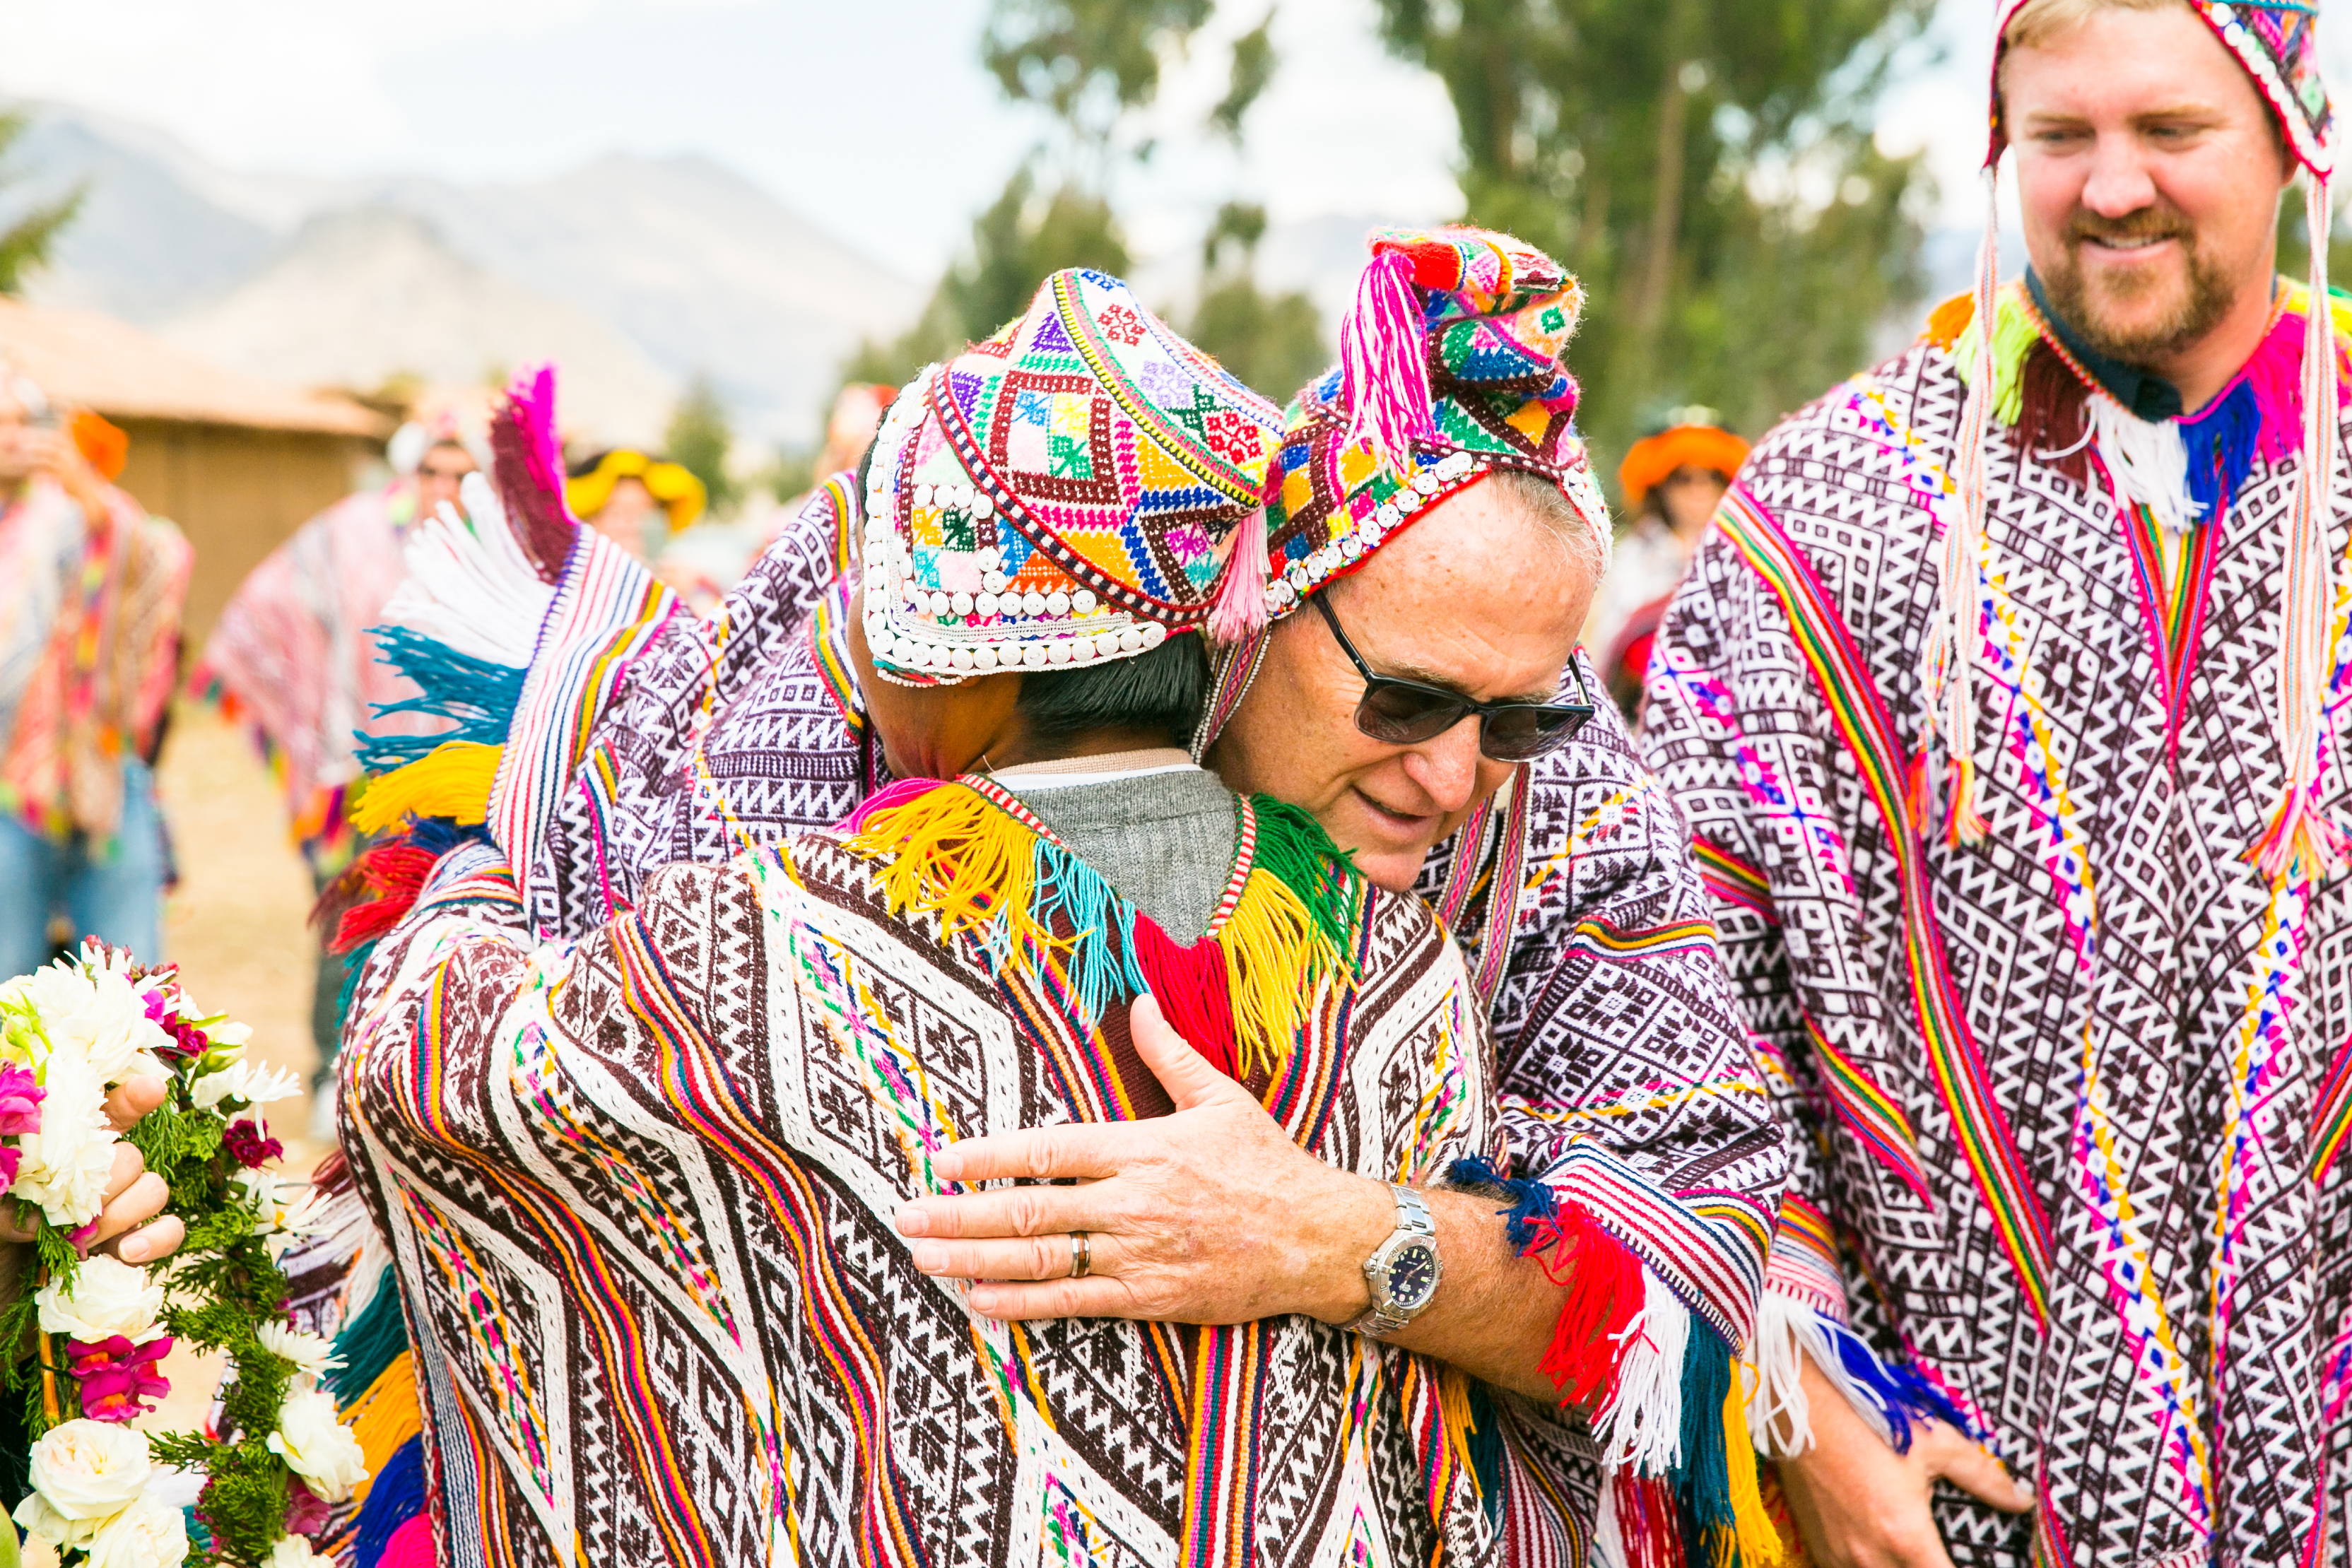 Academy Mortgage Founder Duane Shaw (left) and CEO Adam Kessler (right) greet local villagers on Academy's Service Expedition to Peru